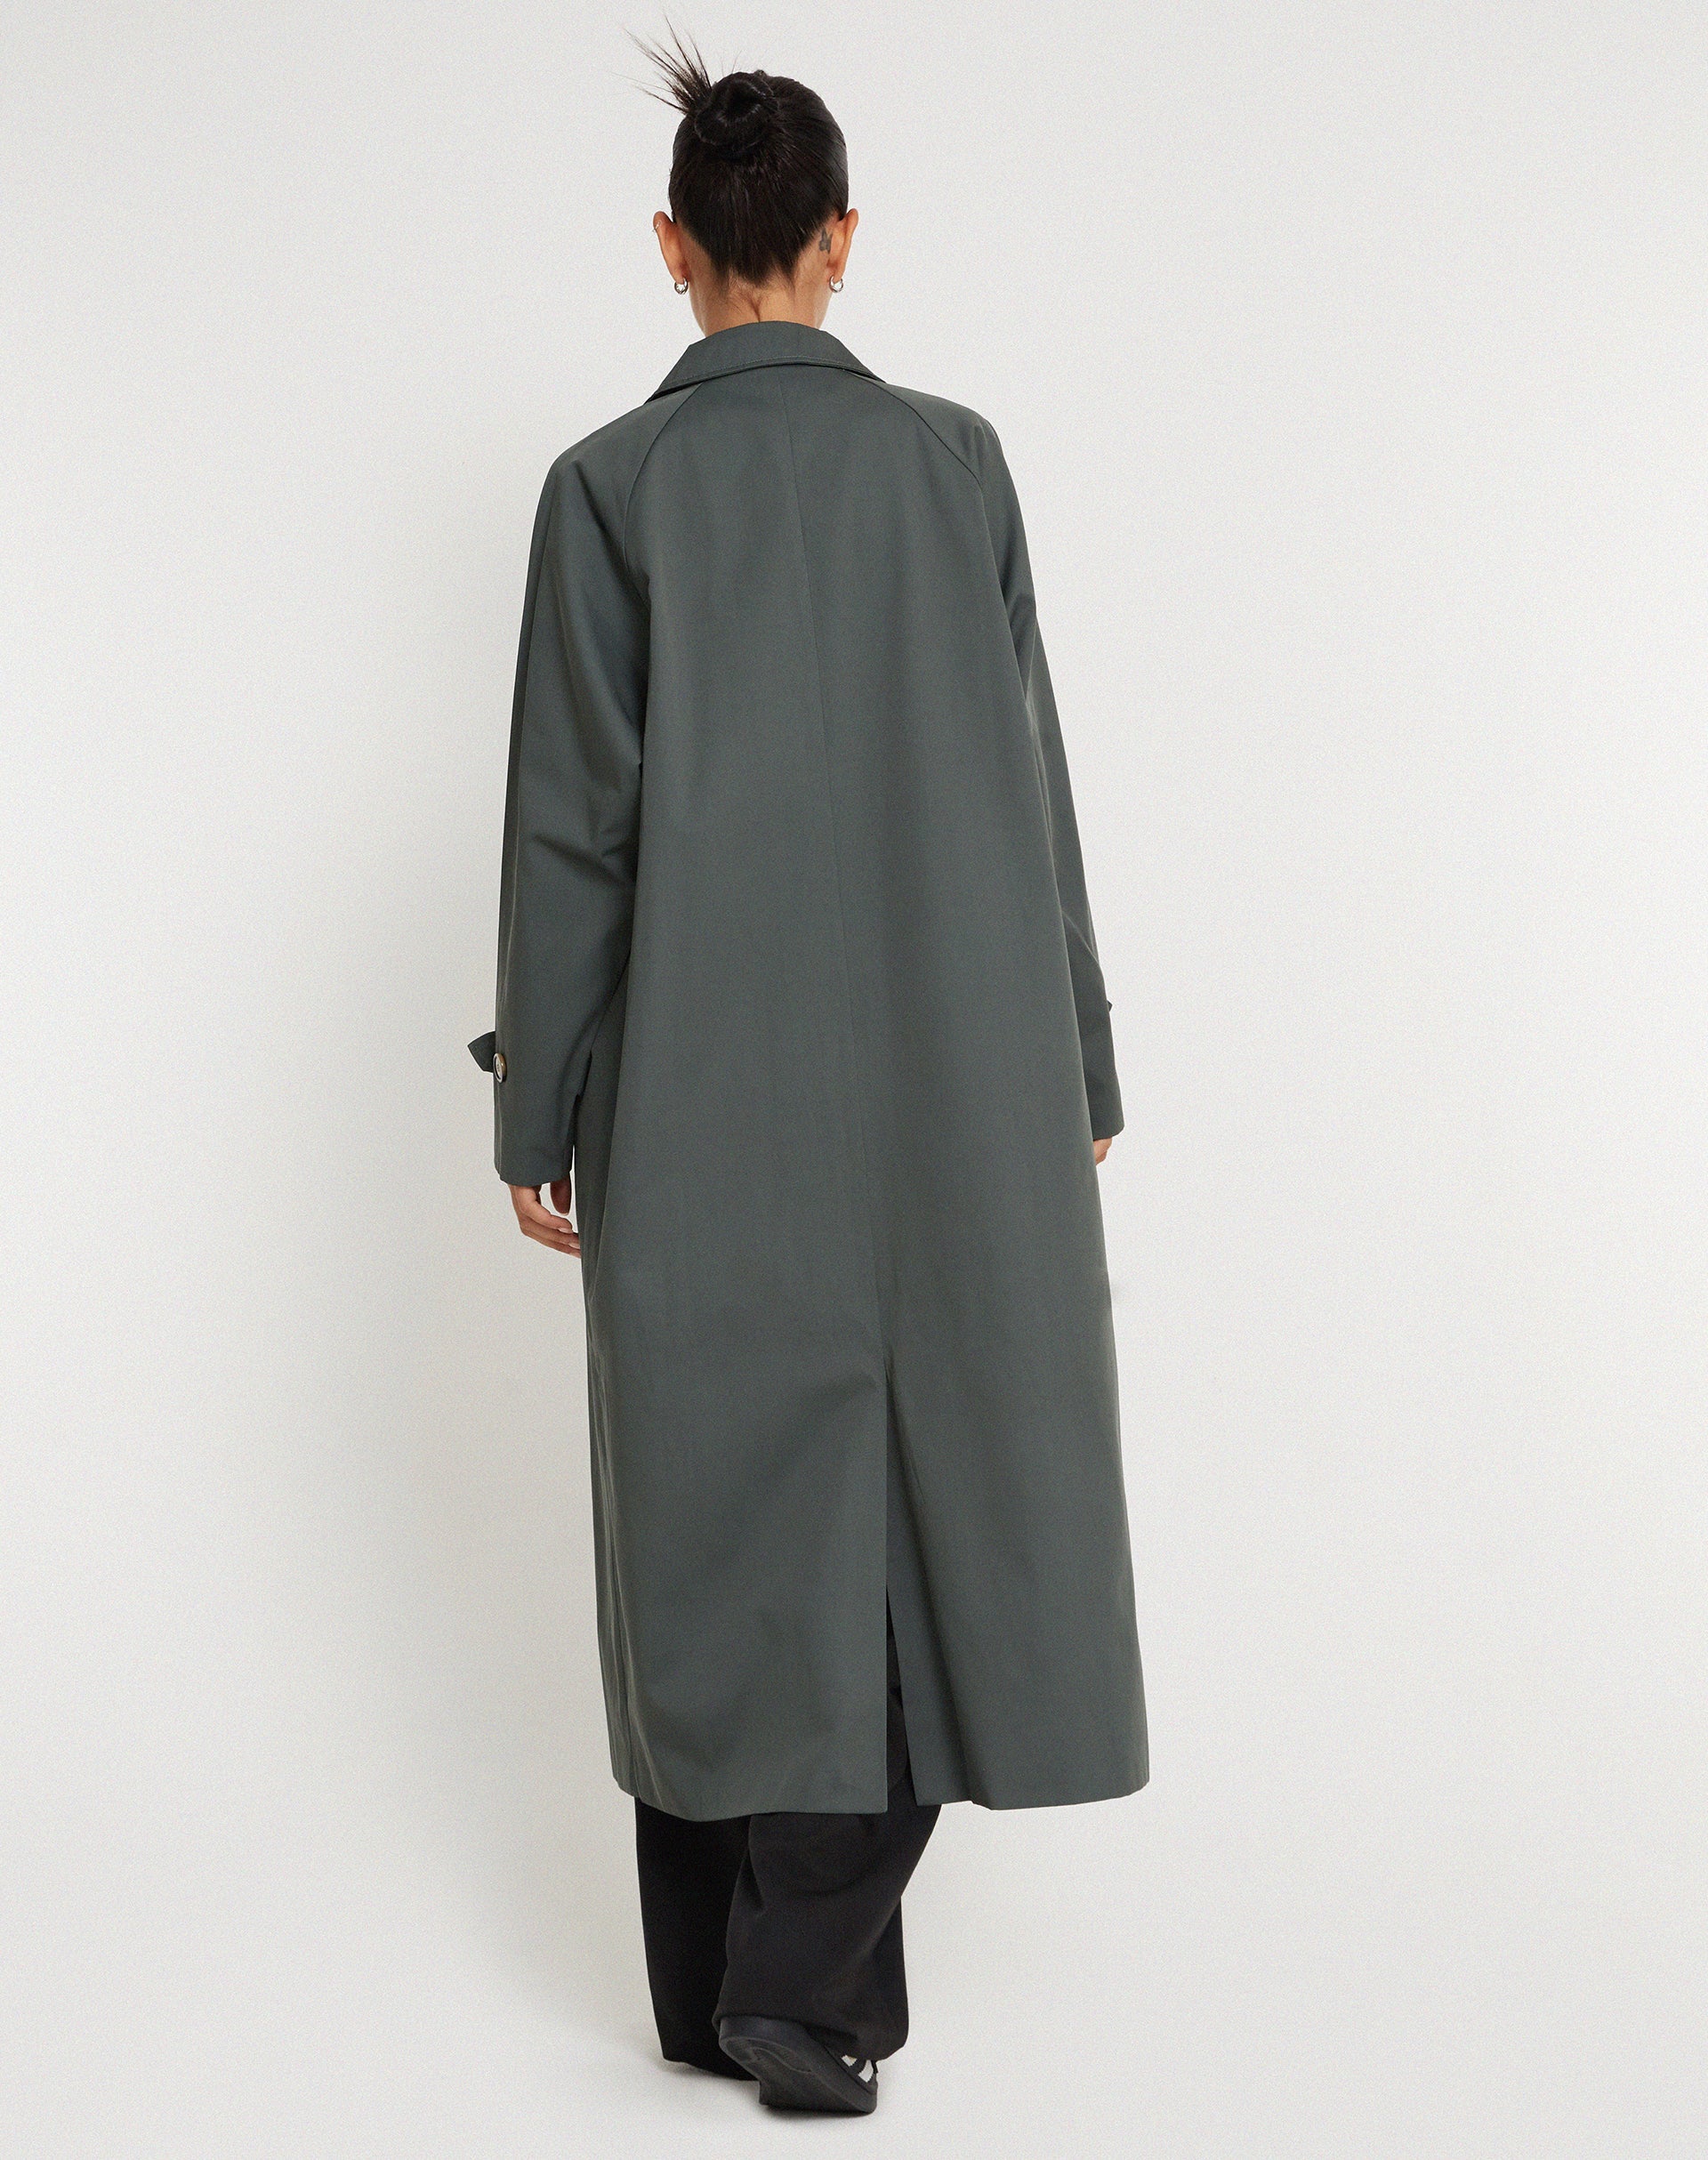 image of Assa Trench Coat in Light Charcoal with Stripe Lining